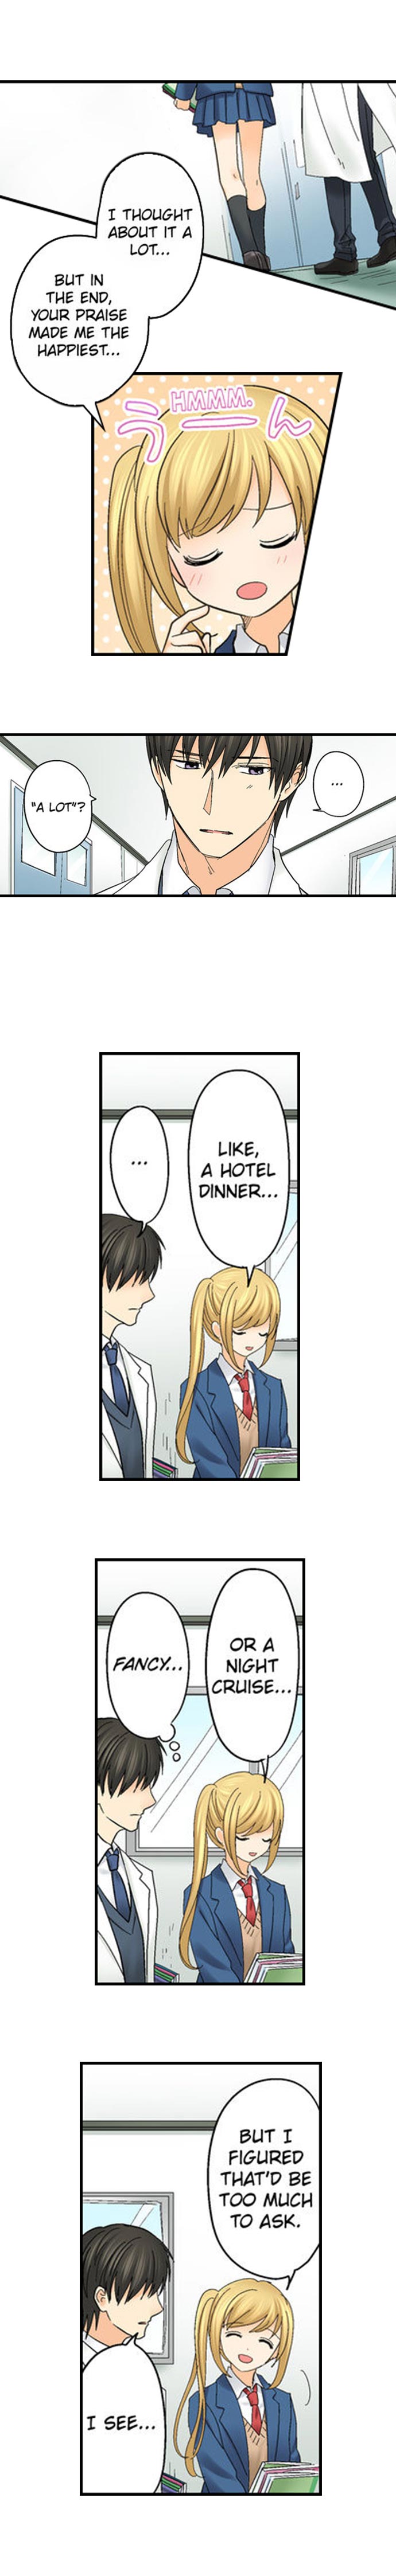 Running a Love Hotel with My Math Teacher - Chapter 98 Page 6